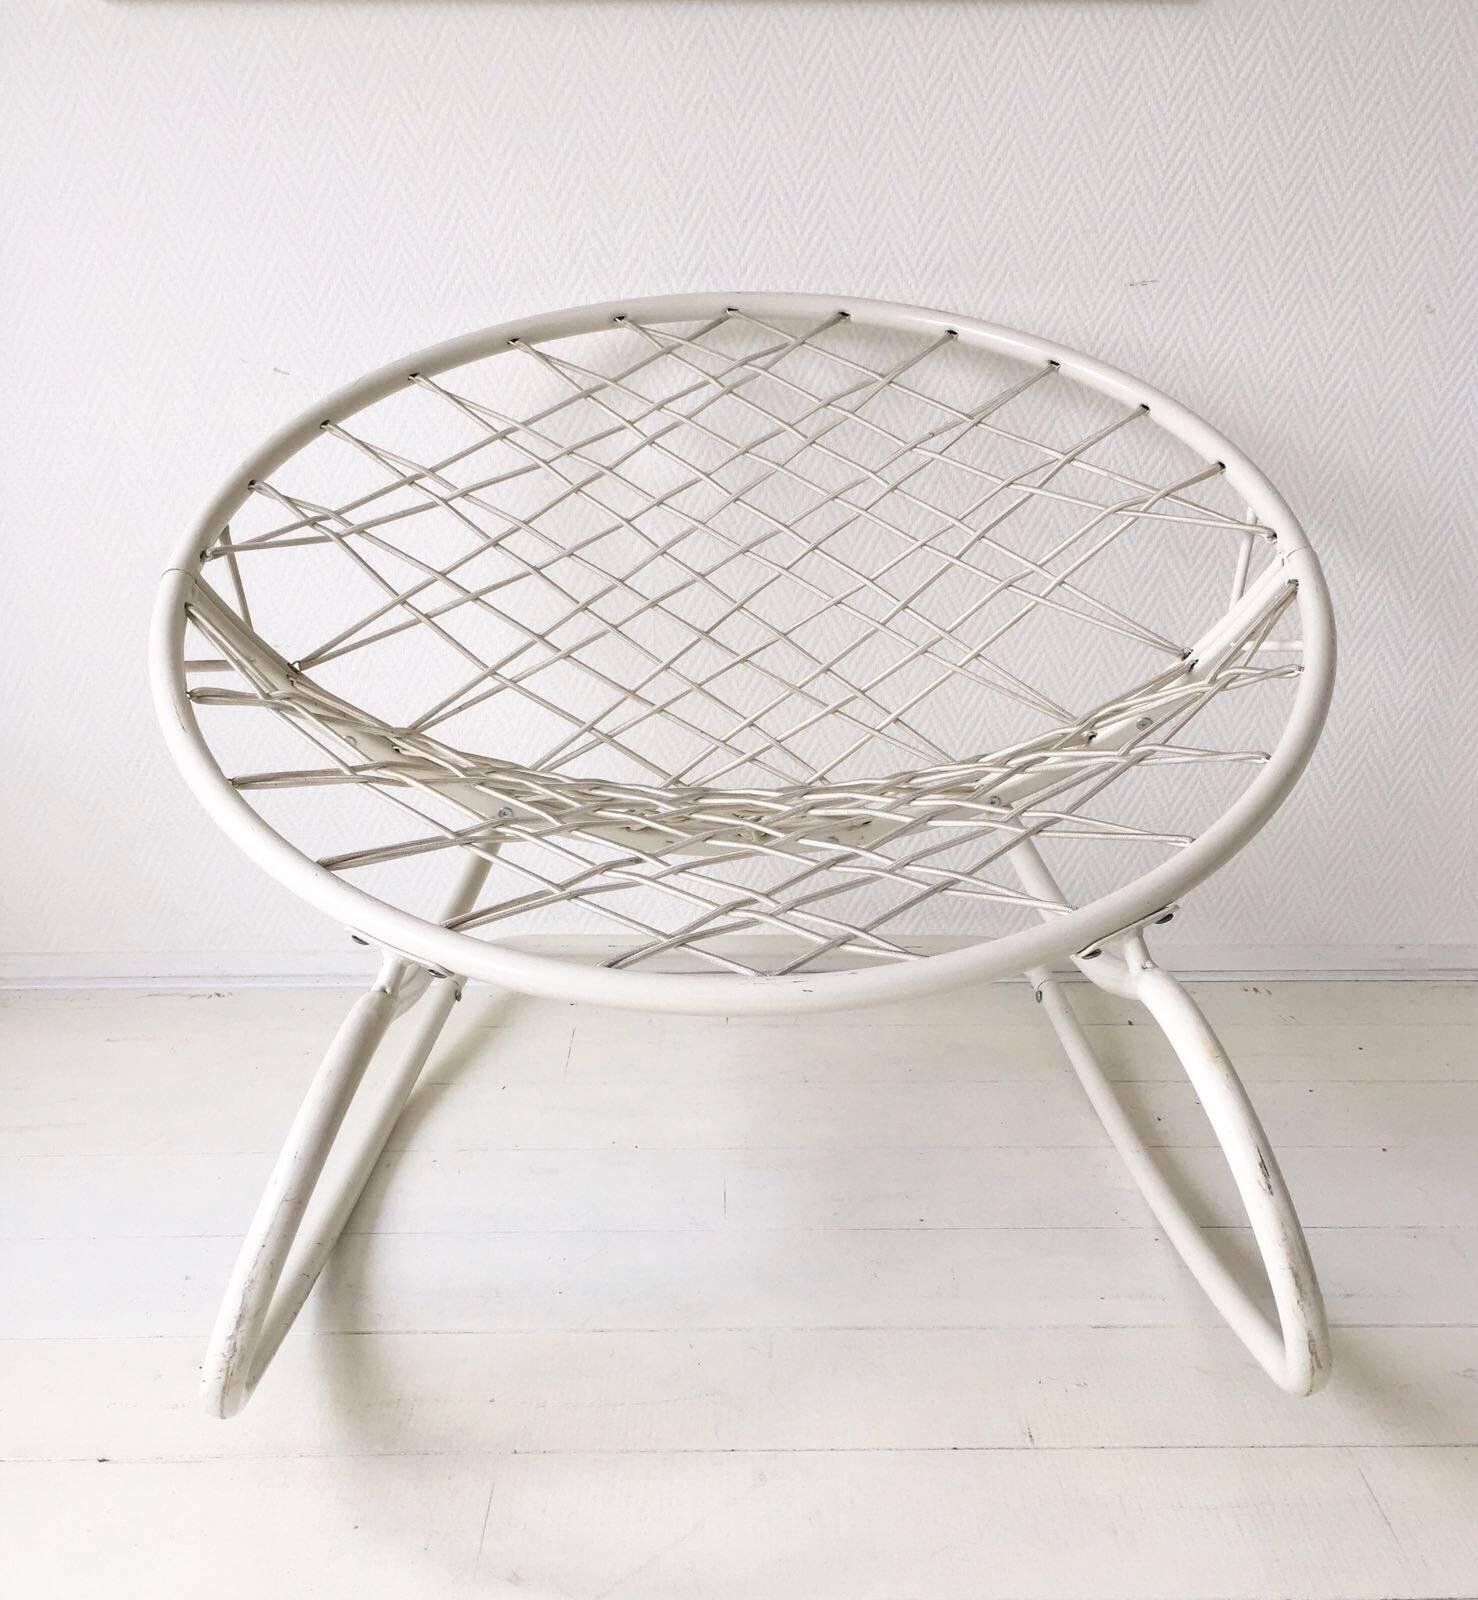 From the PS series Ikea produced this lounge/rocking chair, which was designed by Niels Gammelgaard. The chair features a (off) white enameled metal base with elastic cords creating the upholstery. The chair is no longer in production! Excellent